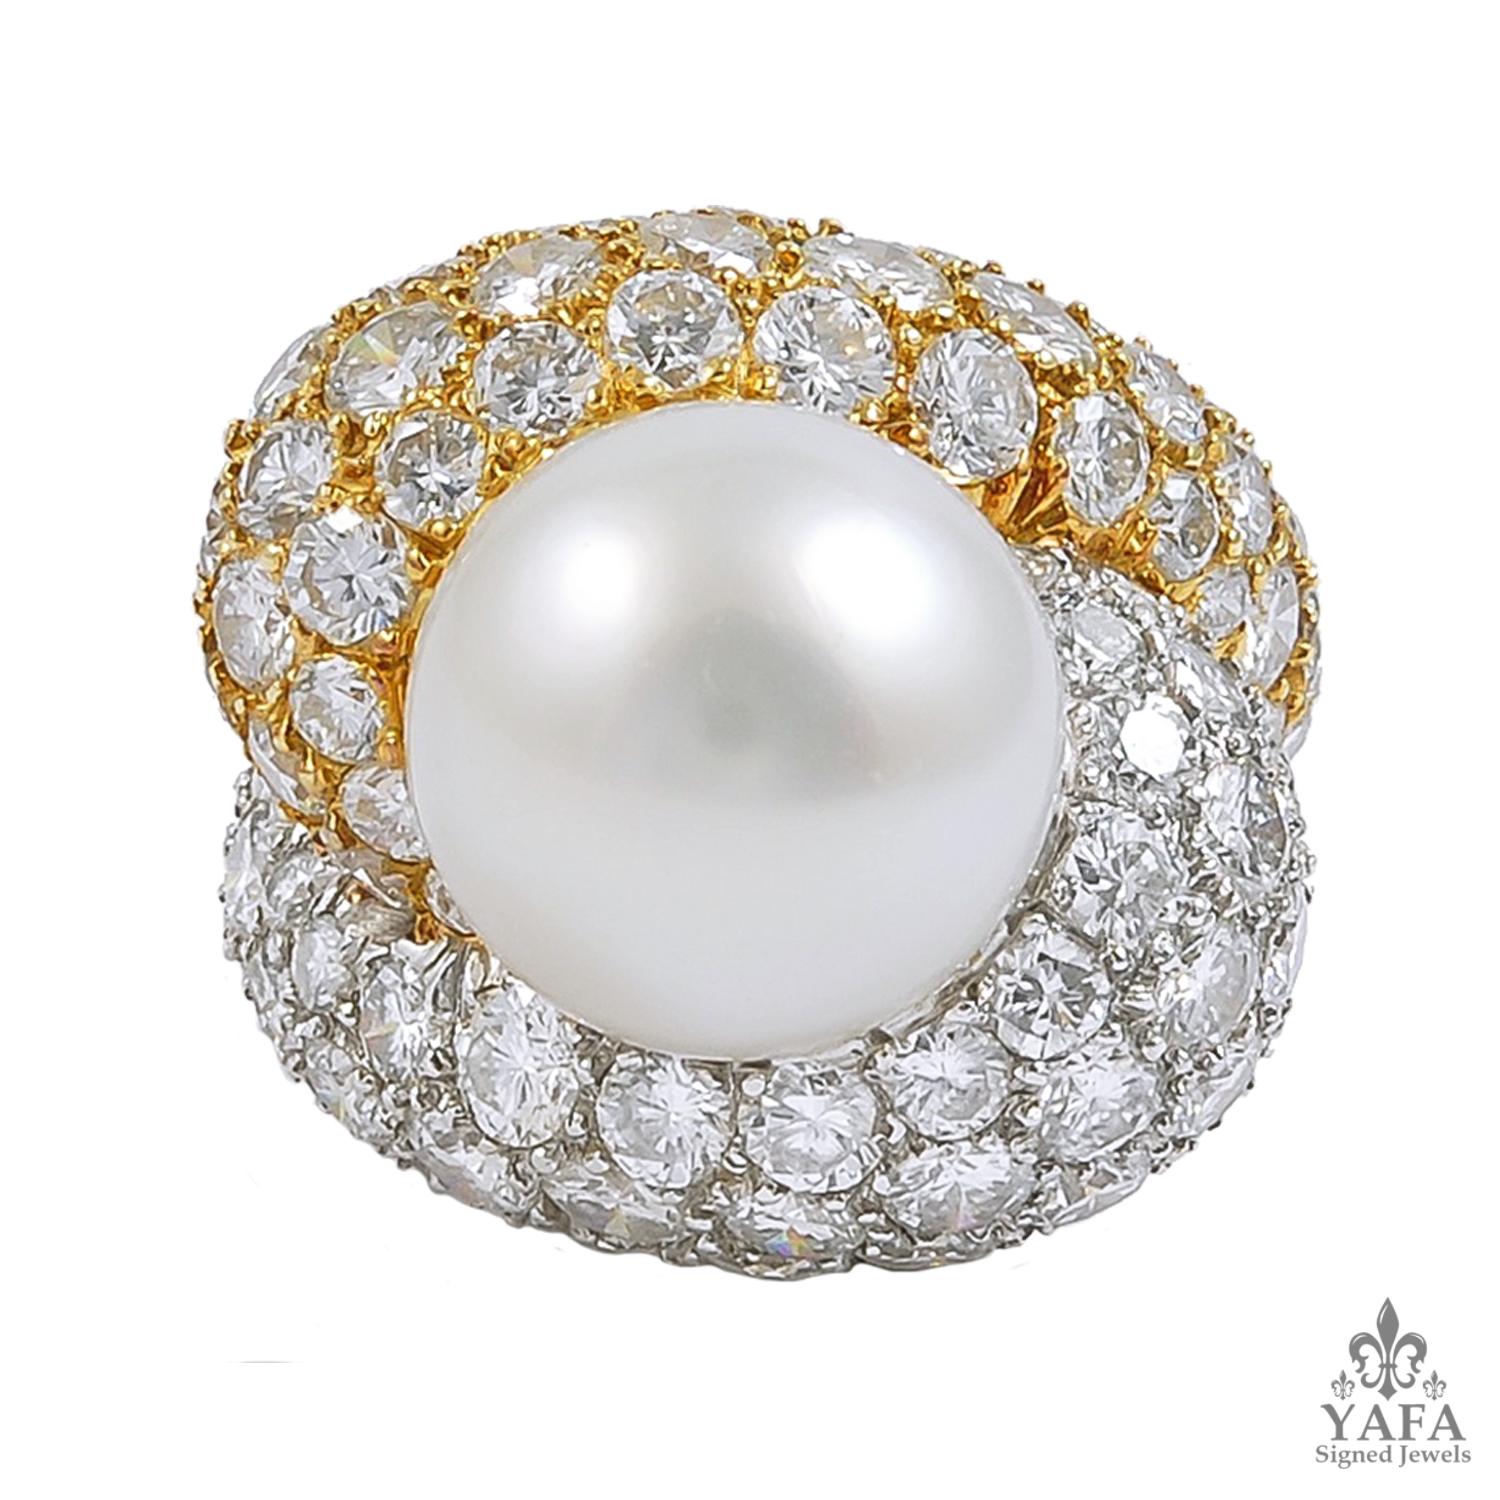 A piece that dates back to the 1980s, comprising an elegant two tone ring with an exceptional twist design, with one half crafted in platinum and the other half in 18k yellow gold, centering a 12.7 mm south sea pearl surrounded by an opulence of